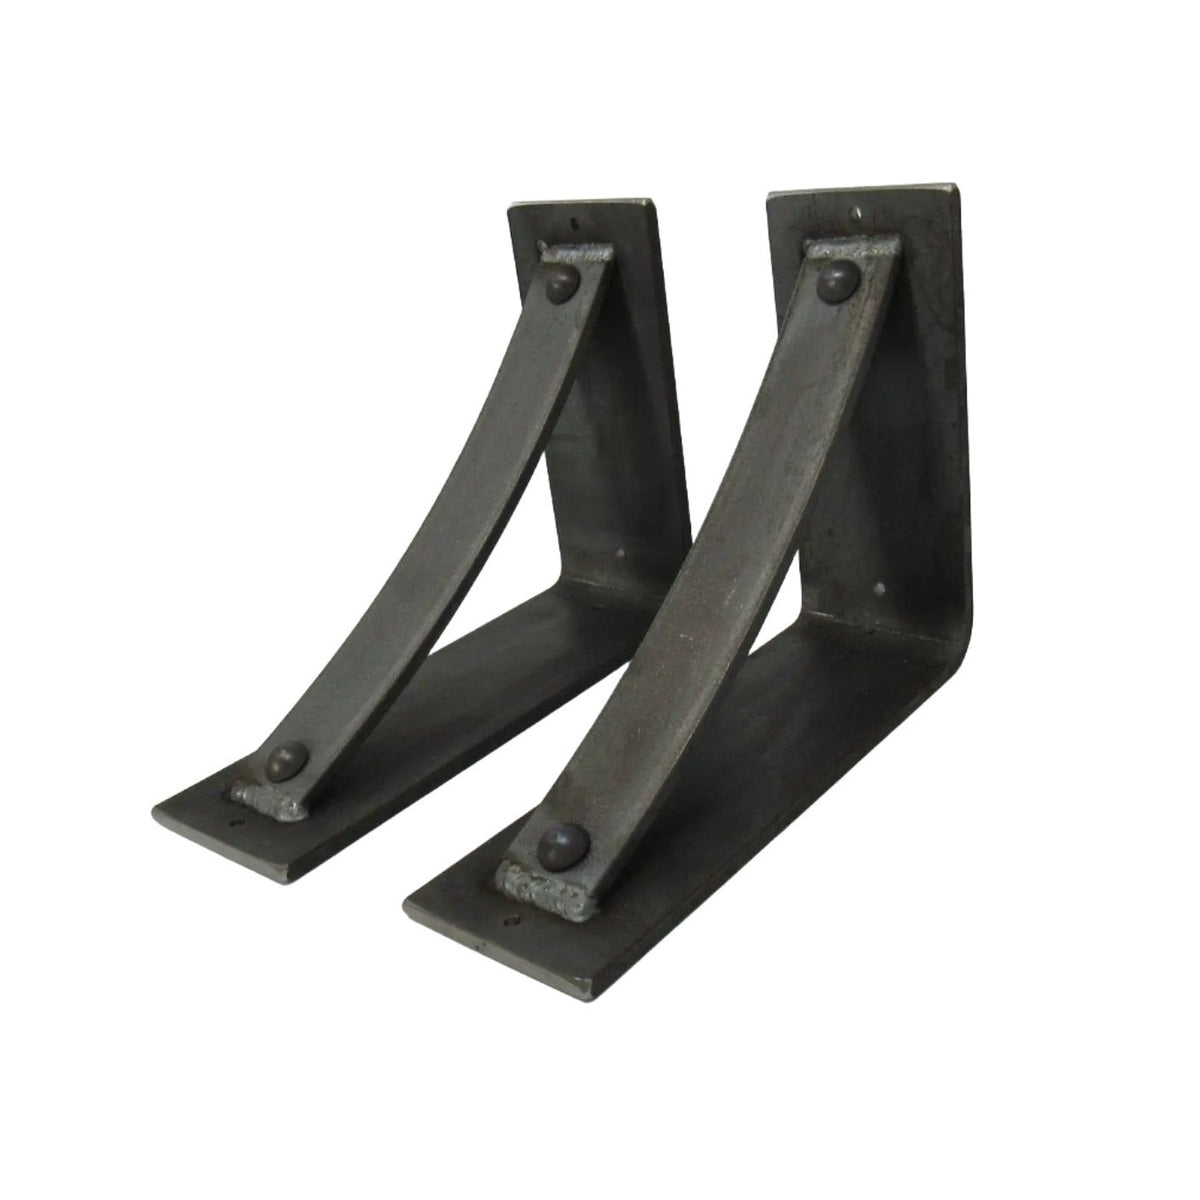 The Troy Shelf Support Shelf Support 5&quot; Depth x 5&quot; Wall Mount Length Finish Black Powder Coat | Industrial Farm Co